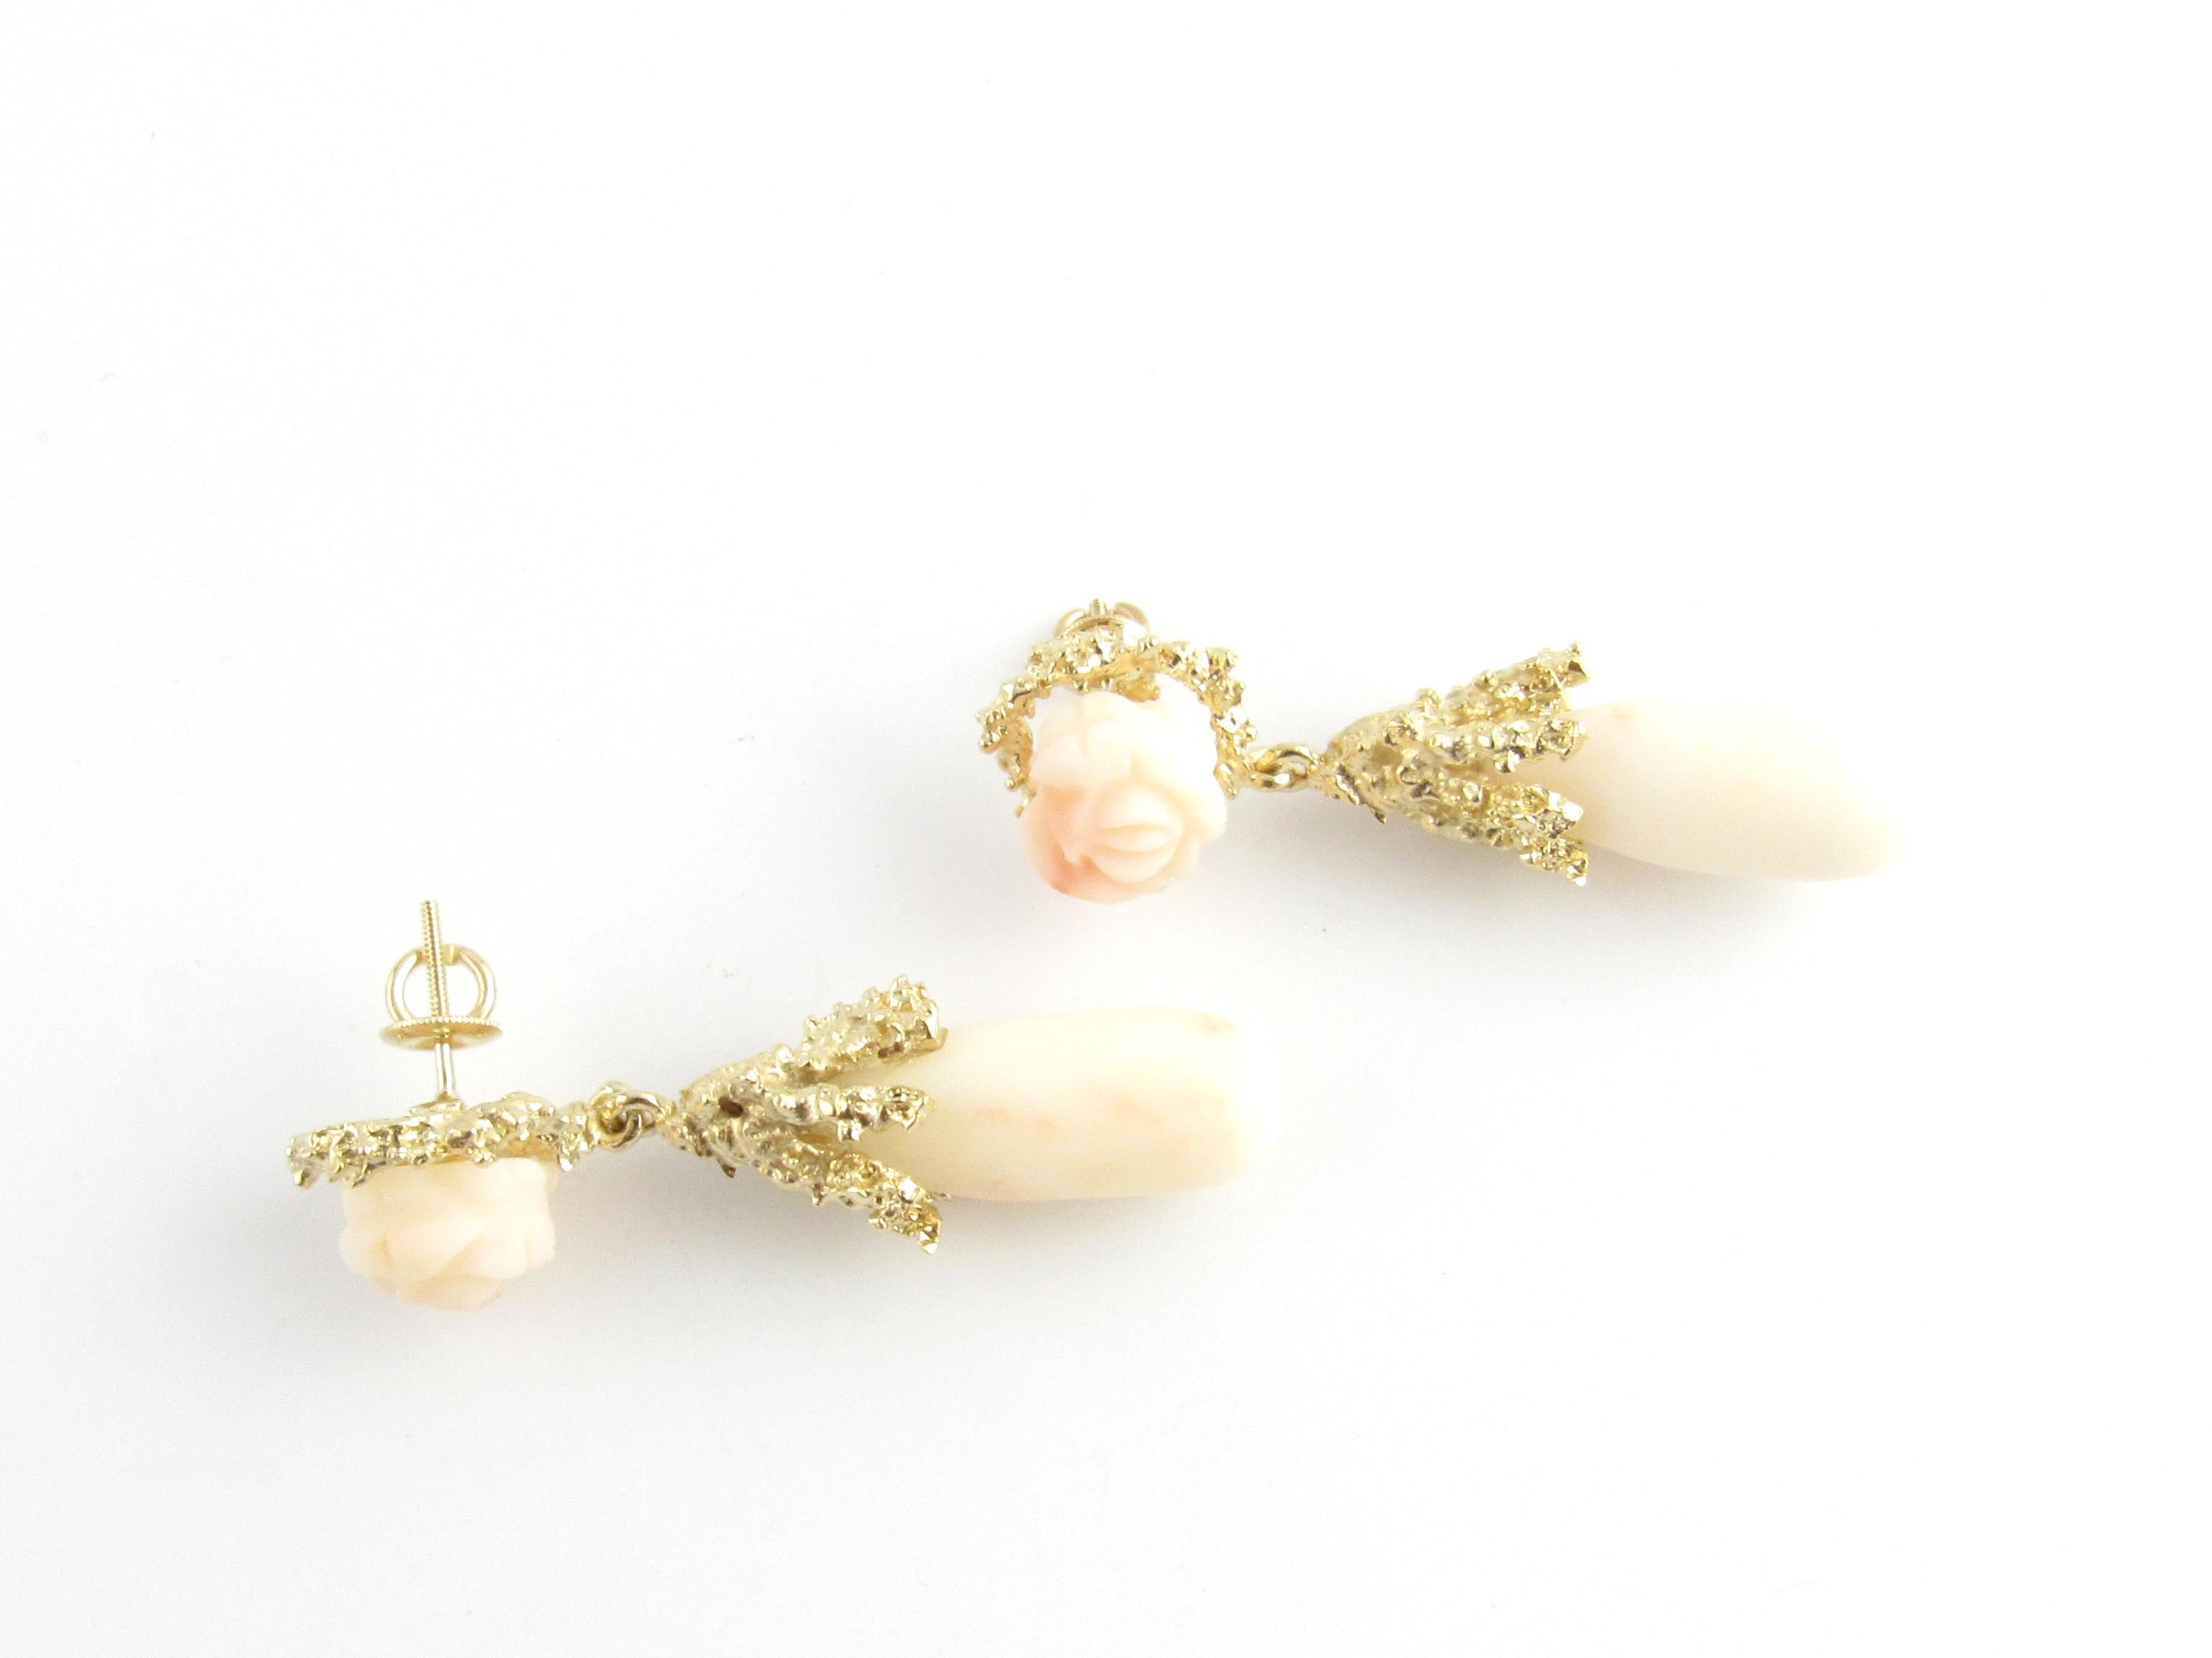 Vintage 14 Karat Yellow Gold and Coral Earrings

These lovely earrings are crafted in stunning pale pink coral set in beautifully detailed 14K yellow gold. Push back closures.

Size: 47 mm x 13 mm

Weight: 10.8 dwt. / 16.8 gr.

Stamped: 14K

Very